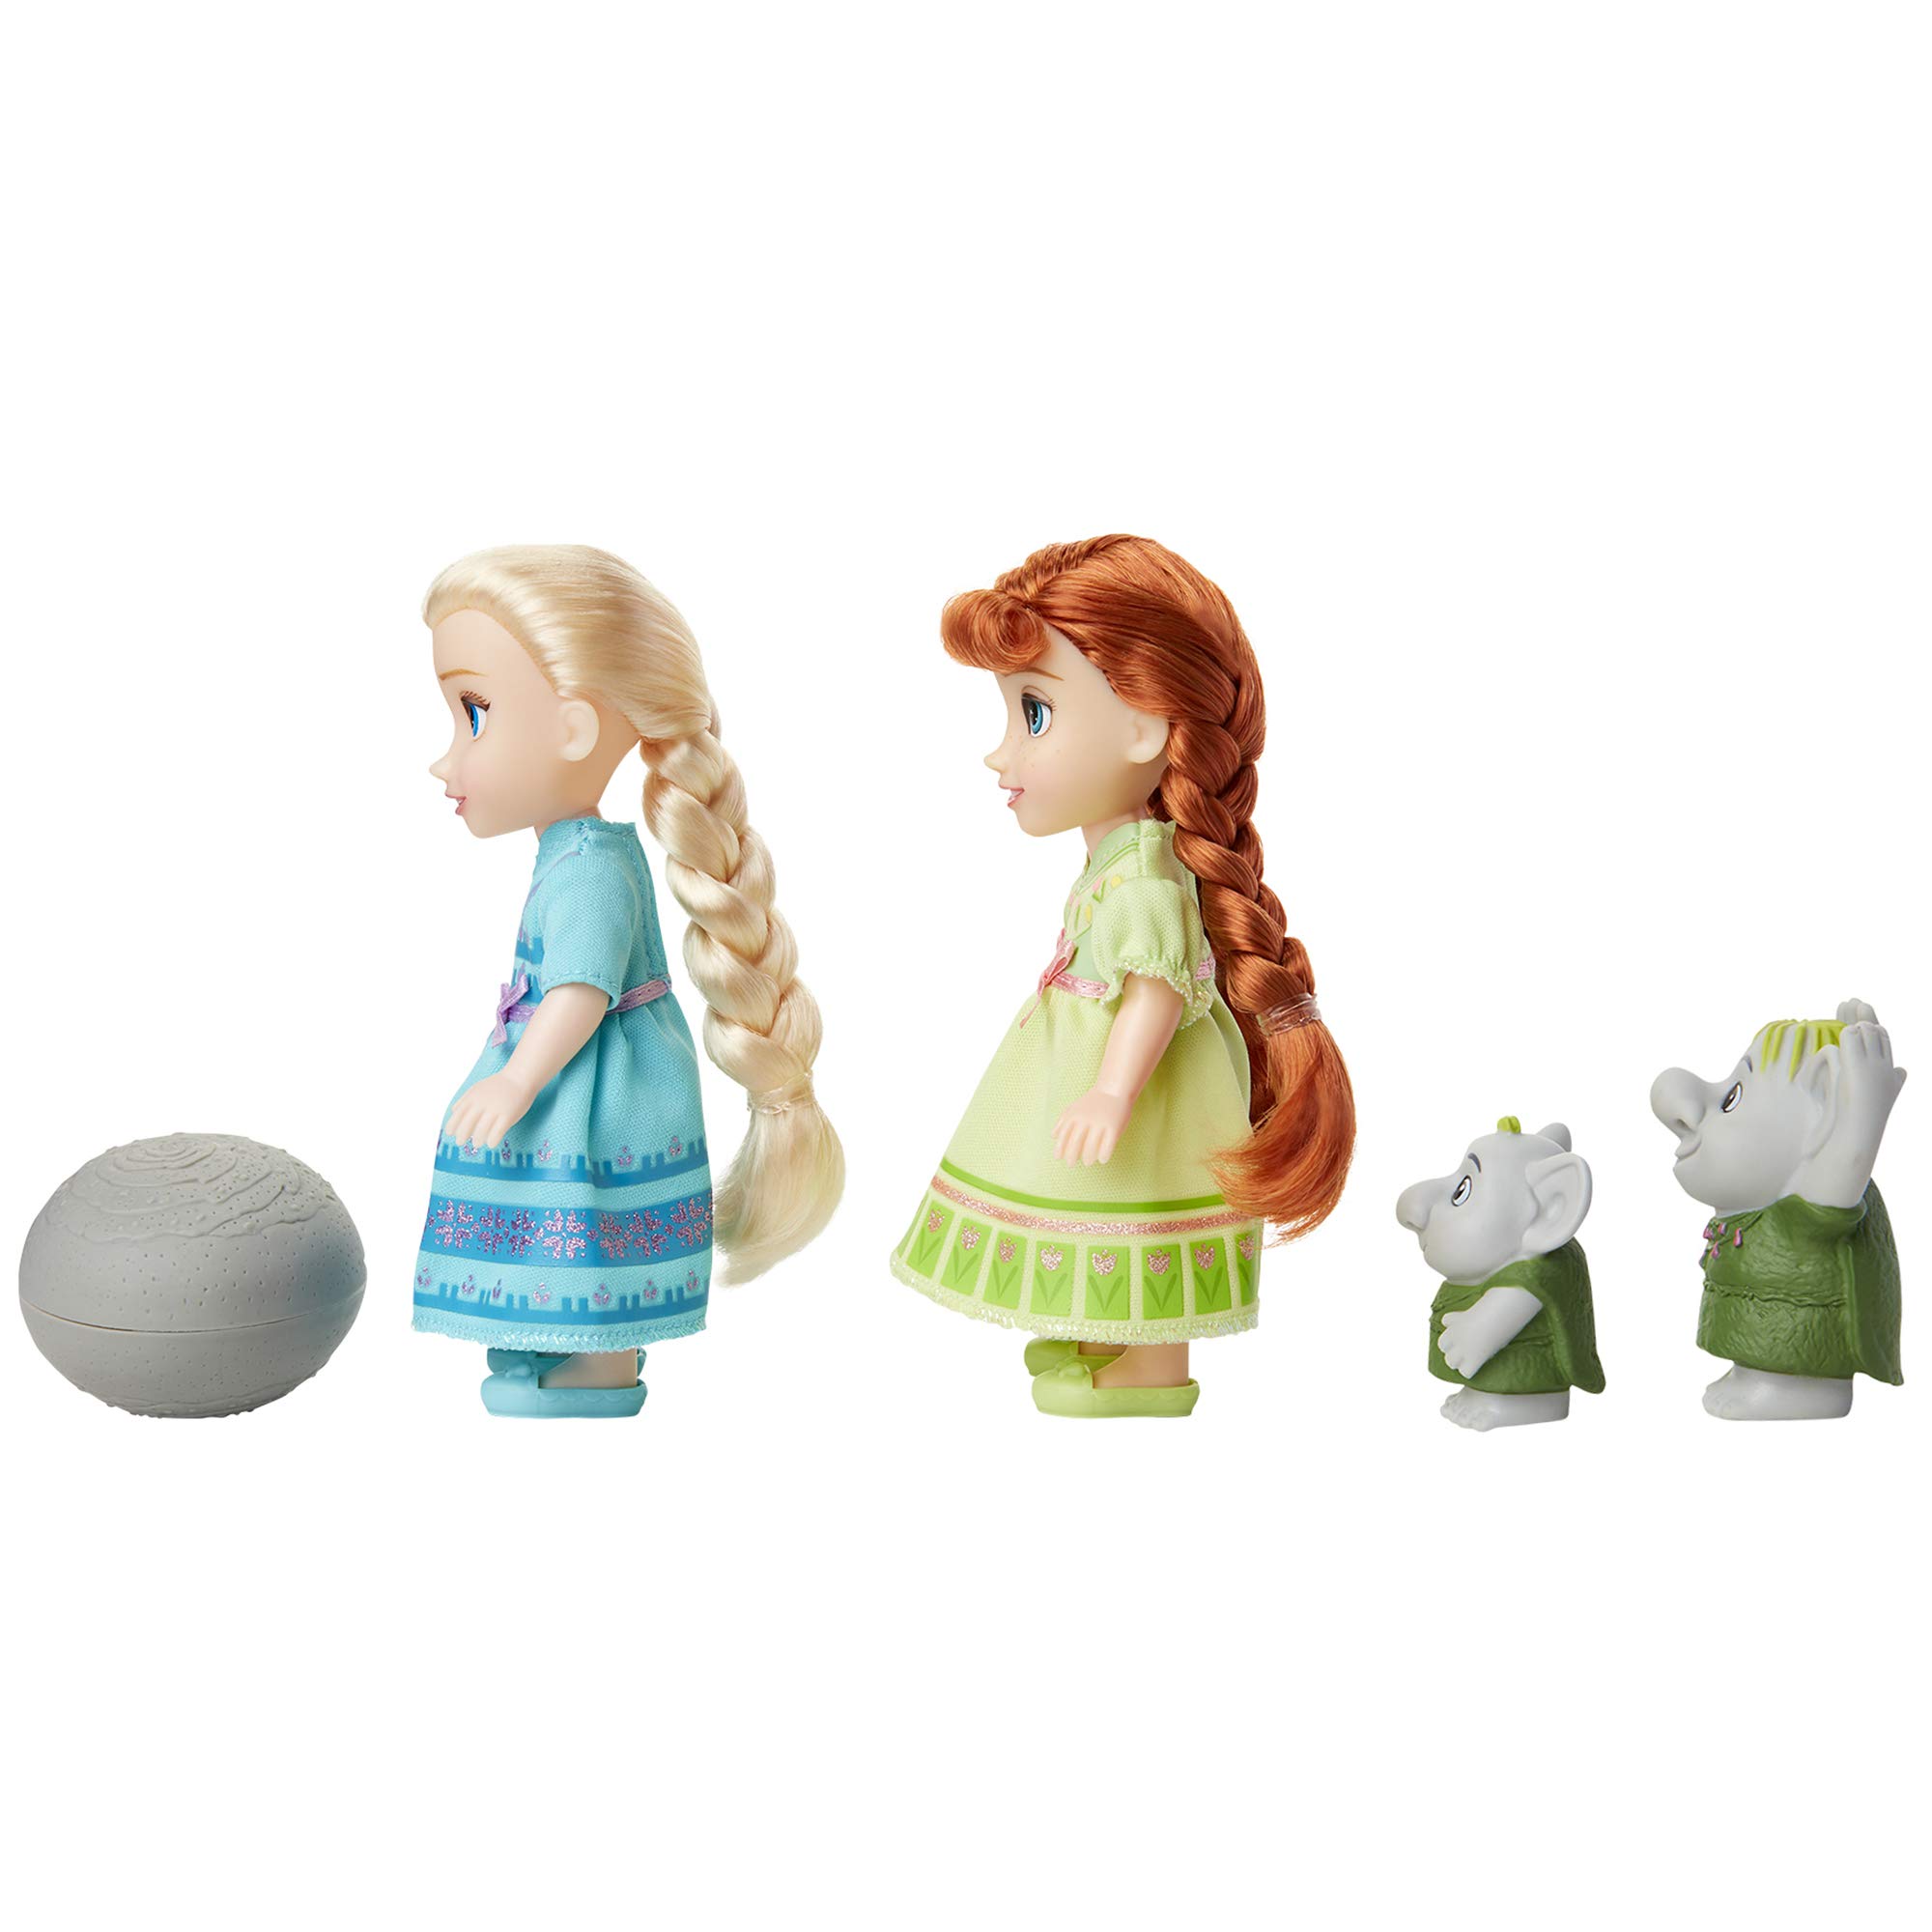 Disney Frozen Petite Anna & Elsa Dolls with Surprise Trolls Gift Set, Each Doll is Approximately 6 inches Tall - Includes 2 Troll Friends! Perfect for Any Frozen Fan!